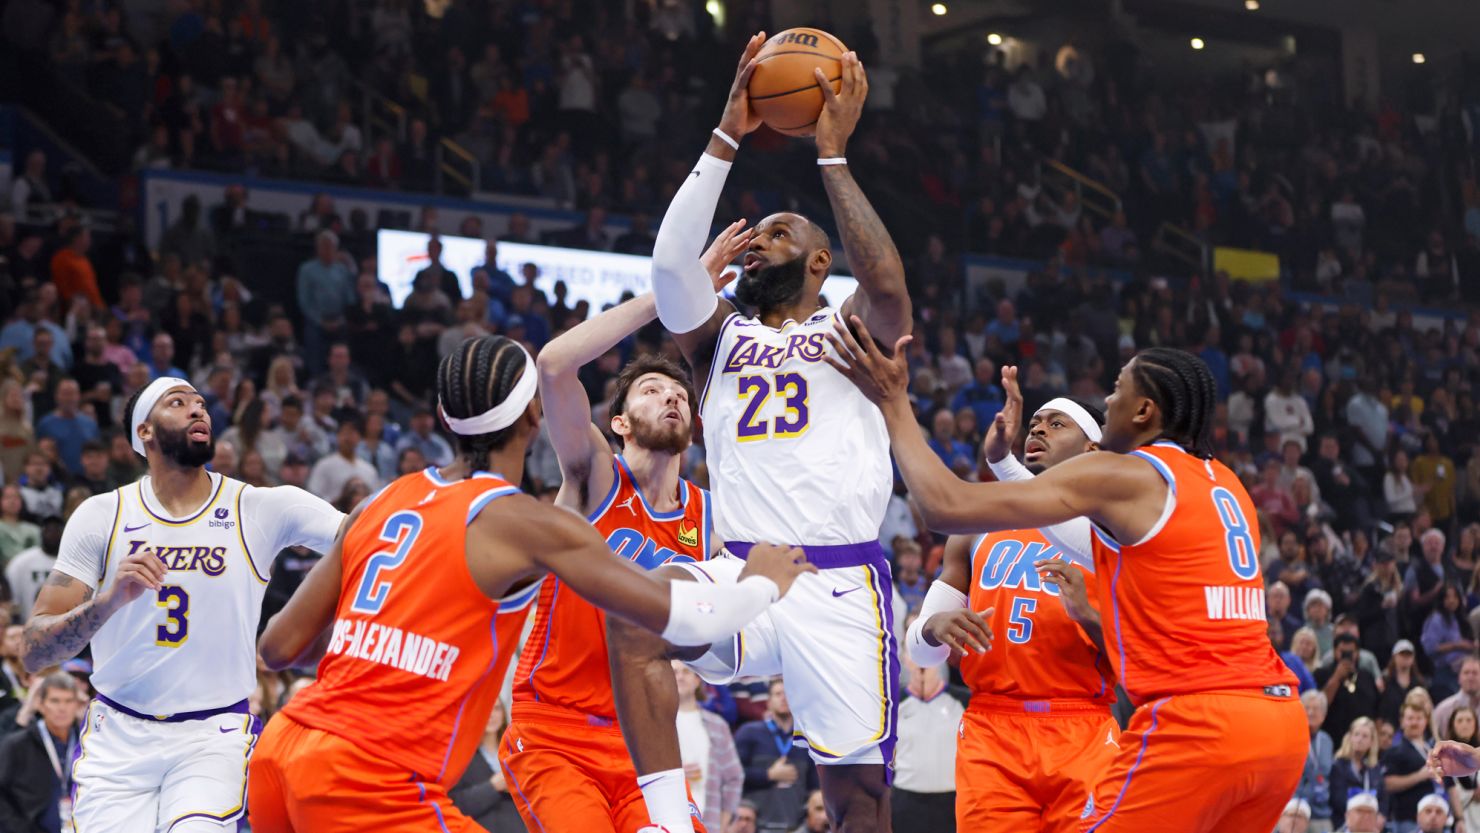 Los Angeles Lakers forward LeBron James (23) prepares to shoot between Oklahoma City Thunder guard Shai Gilgeous-Alexander (2), forward Chet Holmgren, third from left, guard Luguentz Dort (5) and forward Jalen Williams (8) as Lakers forward Anthony Davis (3) watches during the first half of an NBA basketball game Saturday, Dec. 23, 2023, in Oklahoma City. (AP Photo/Nate Billings)